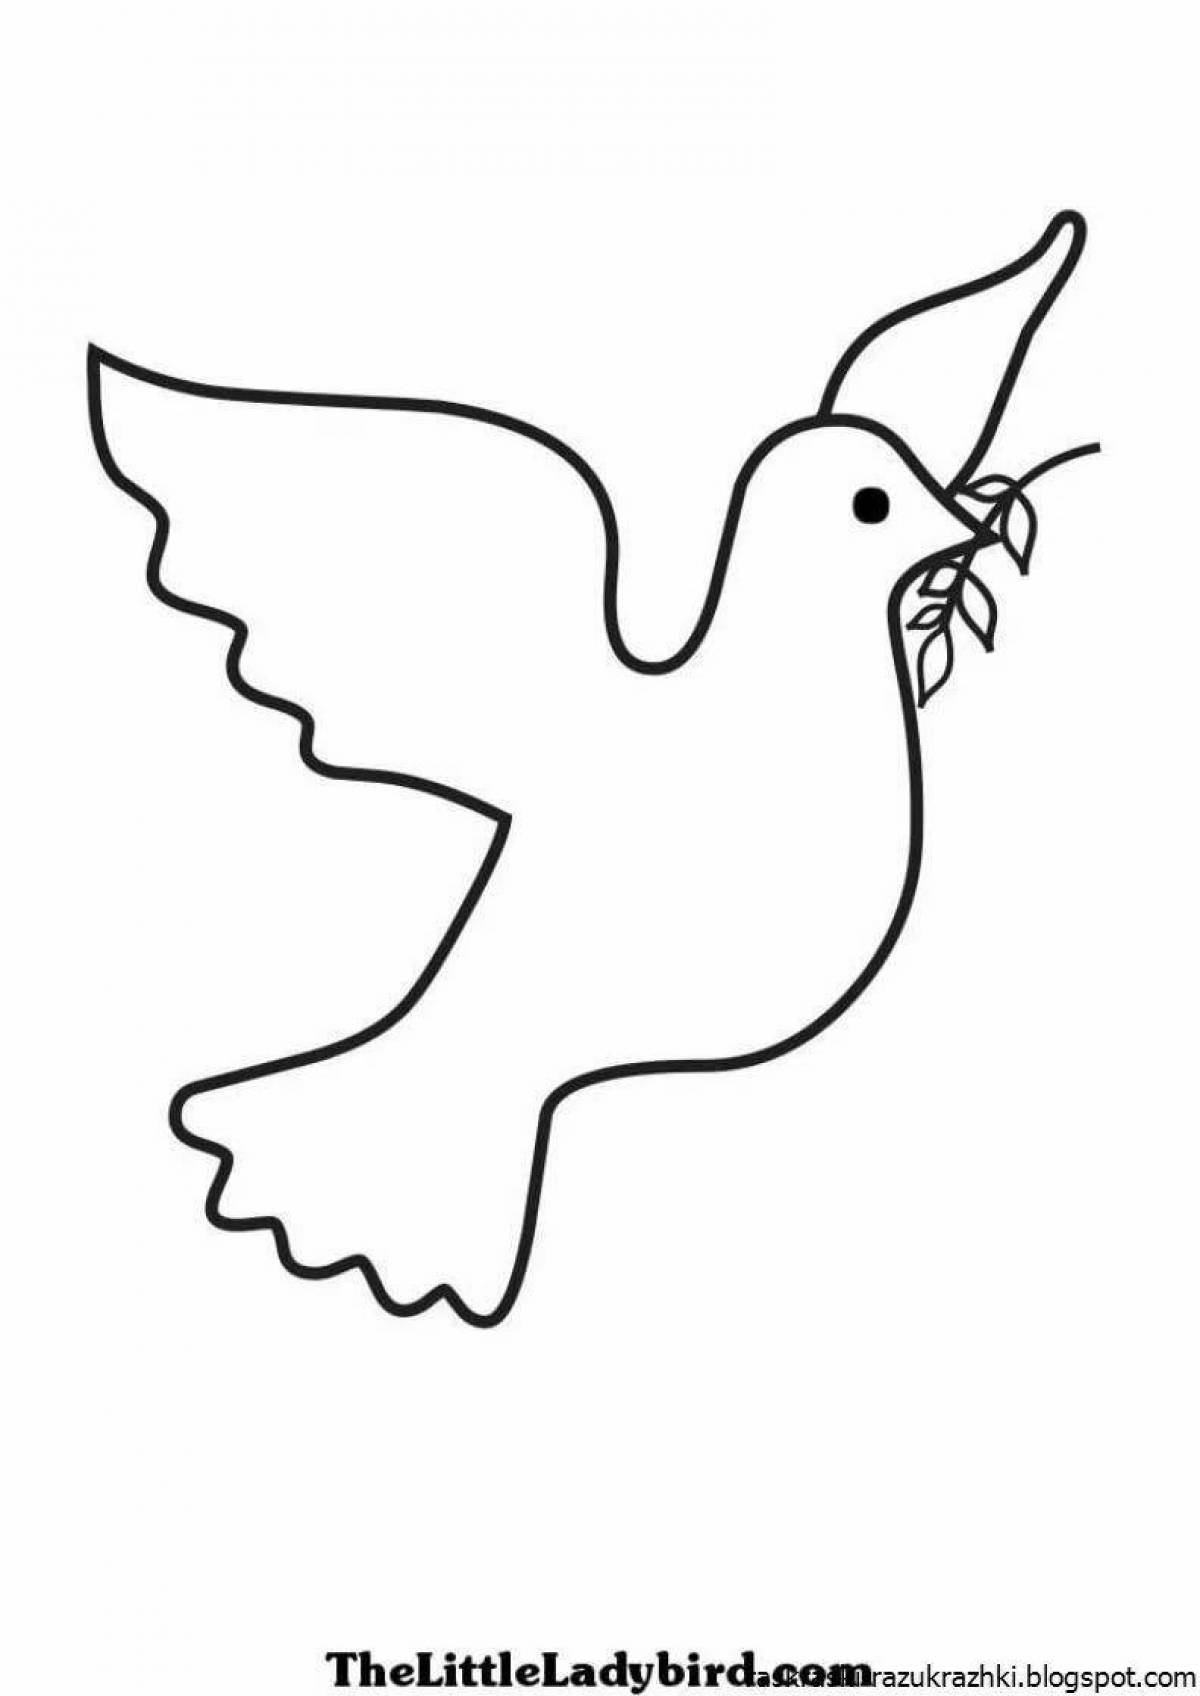 Adorable coloring dove of peace for kids